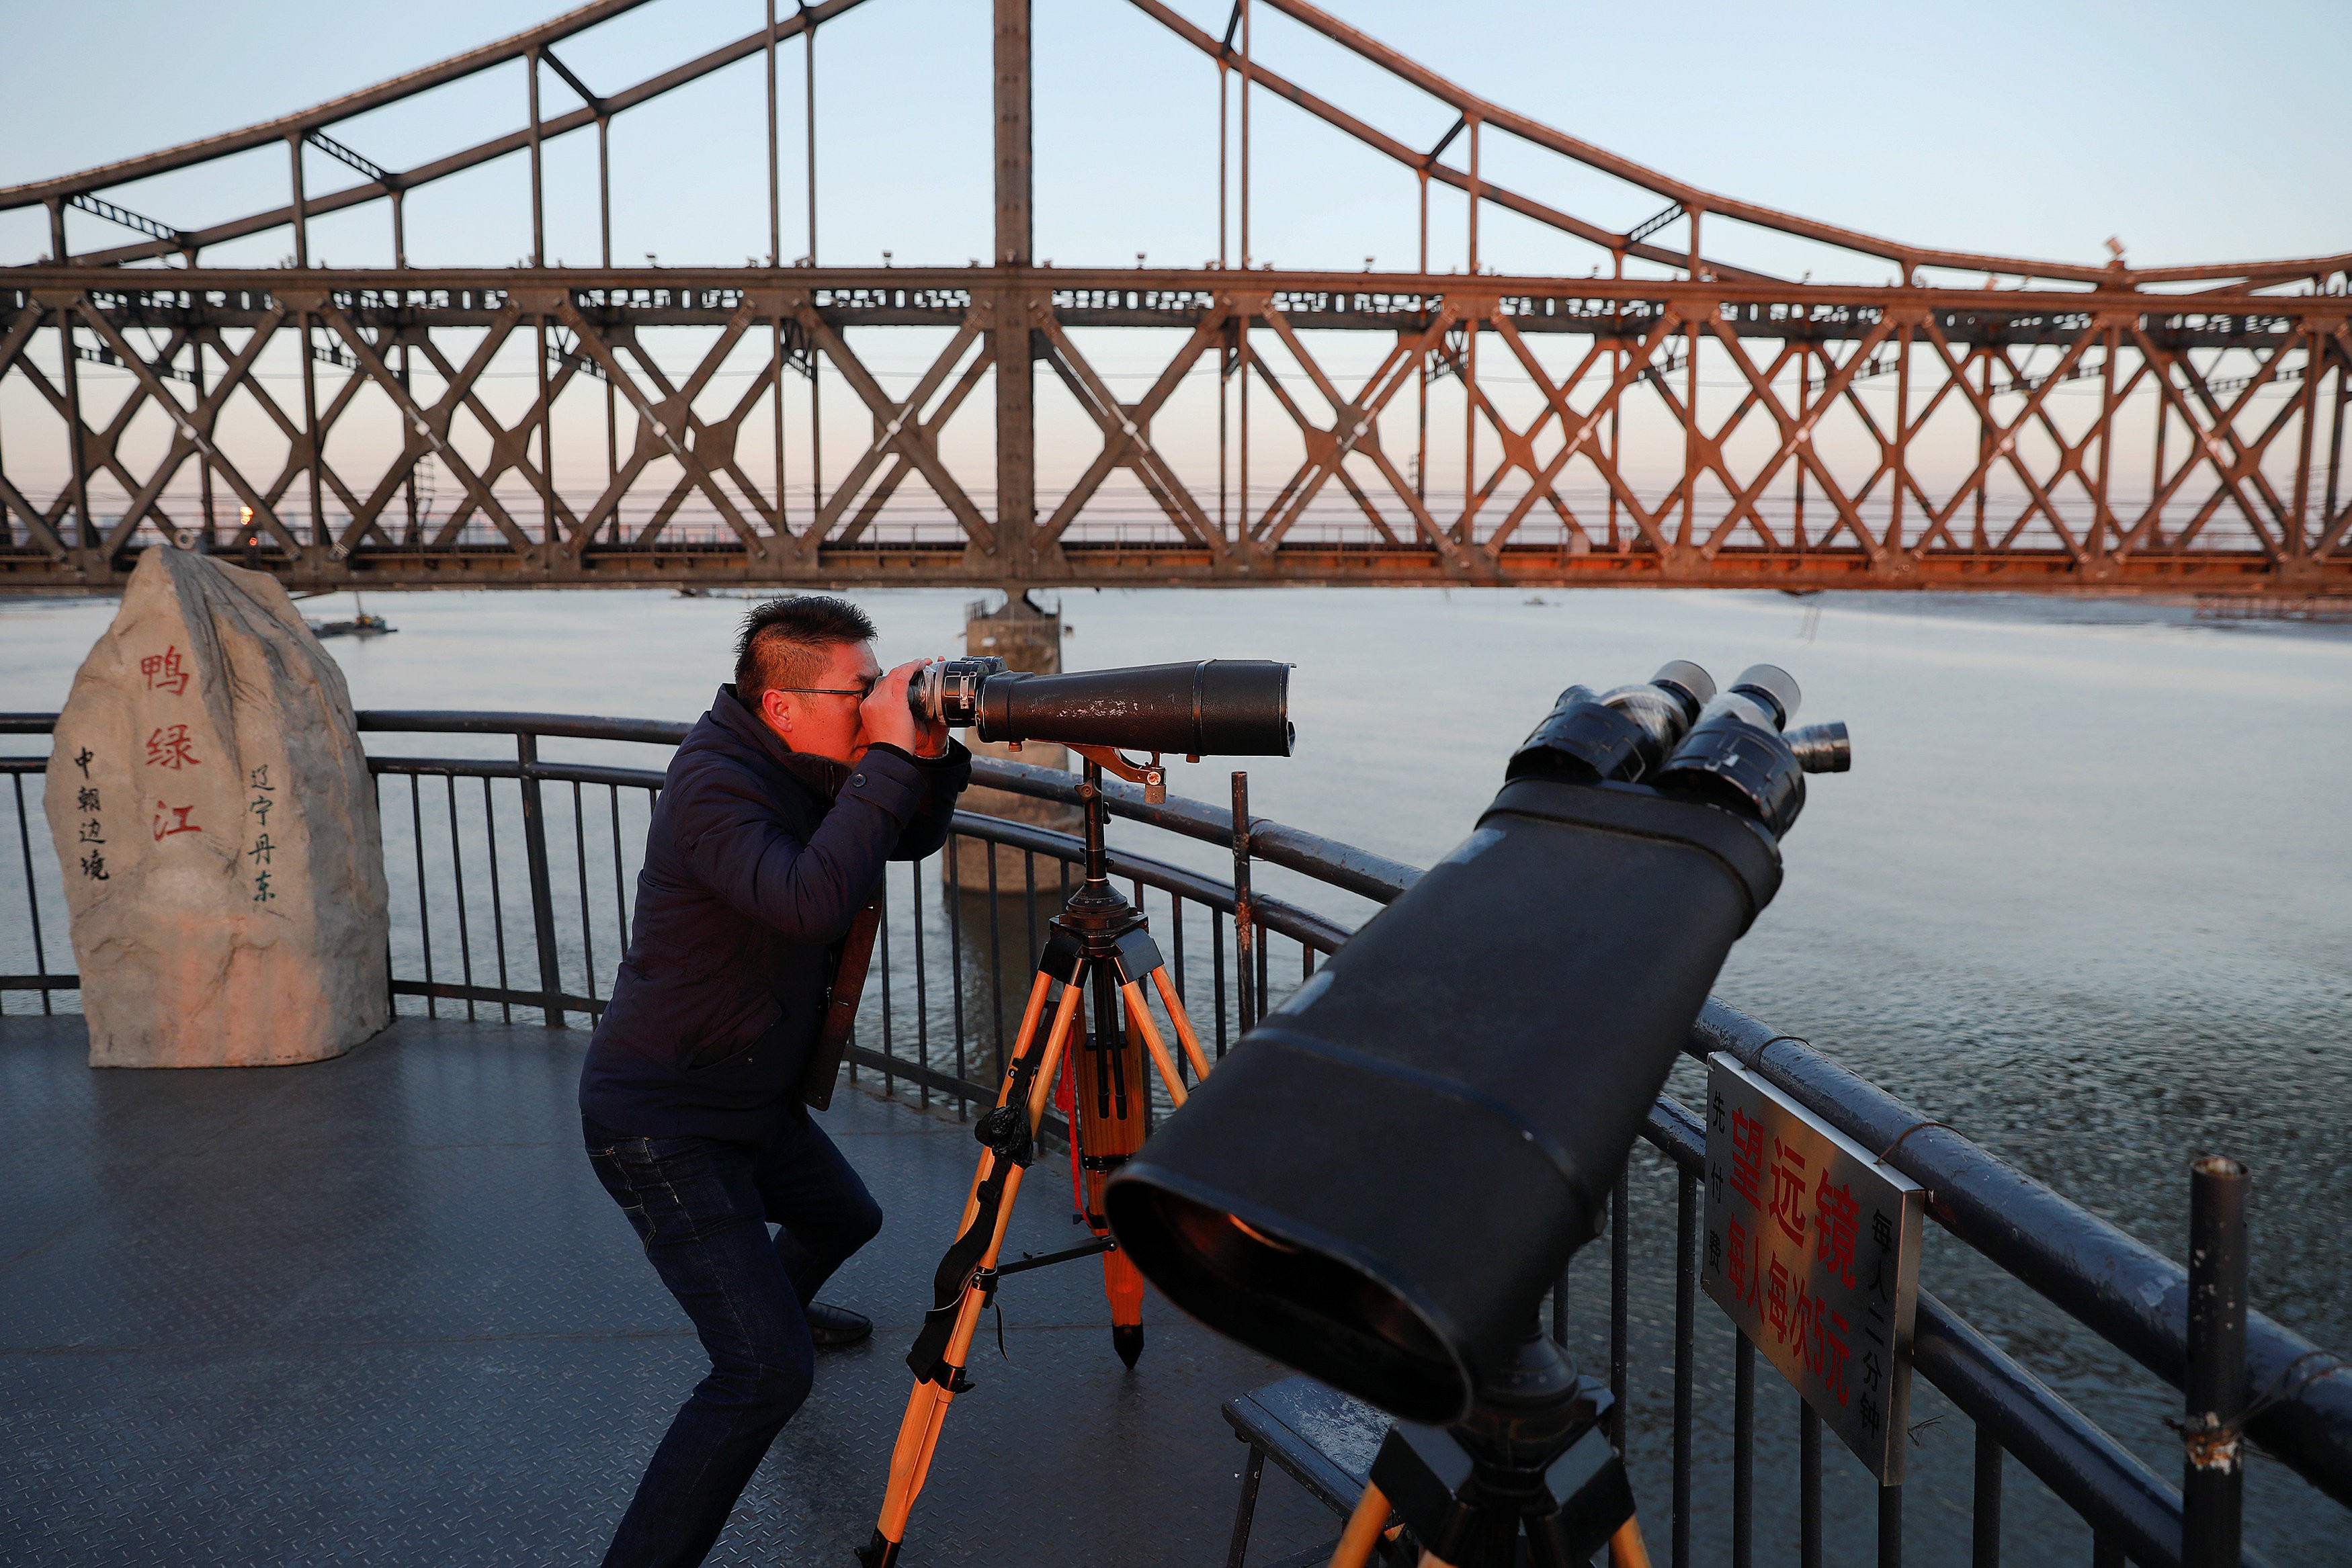 A man looks through binoculars towards North Korea on the Broken Bridge over the Yalu River that connects the North Korean town of Sinuiju and Dandong in Liaoning Province, China. Photo: Reuters